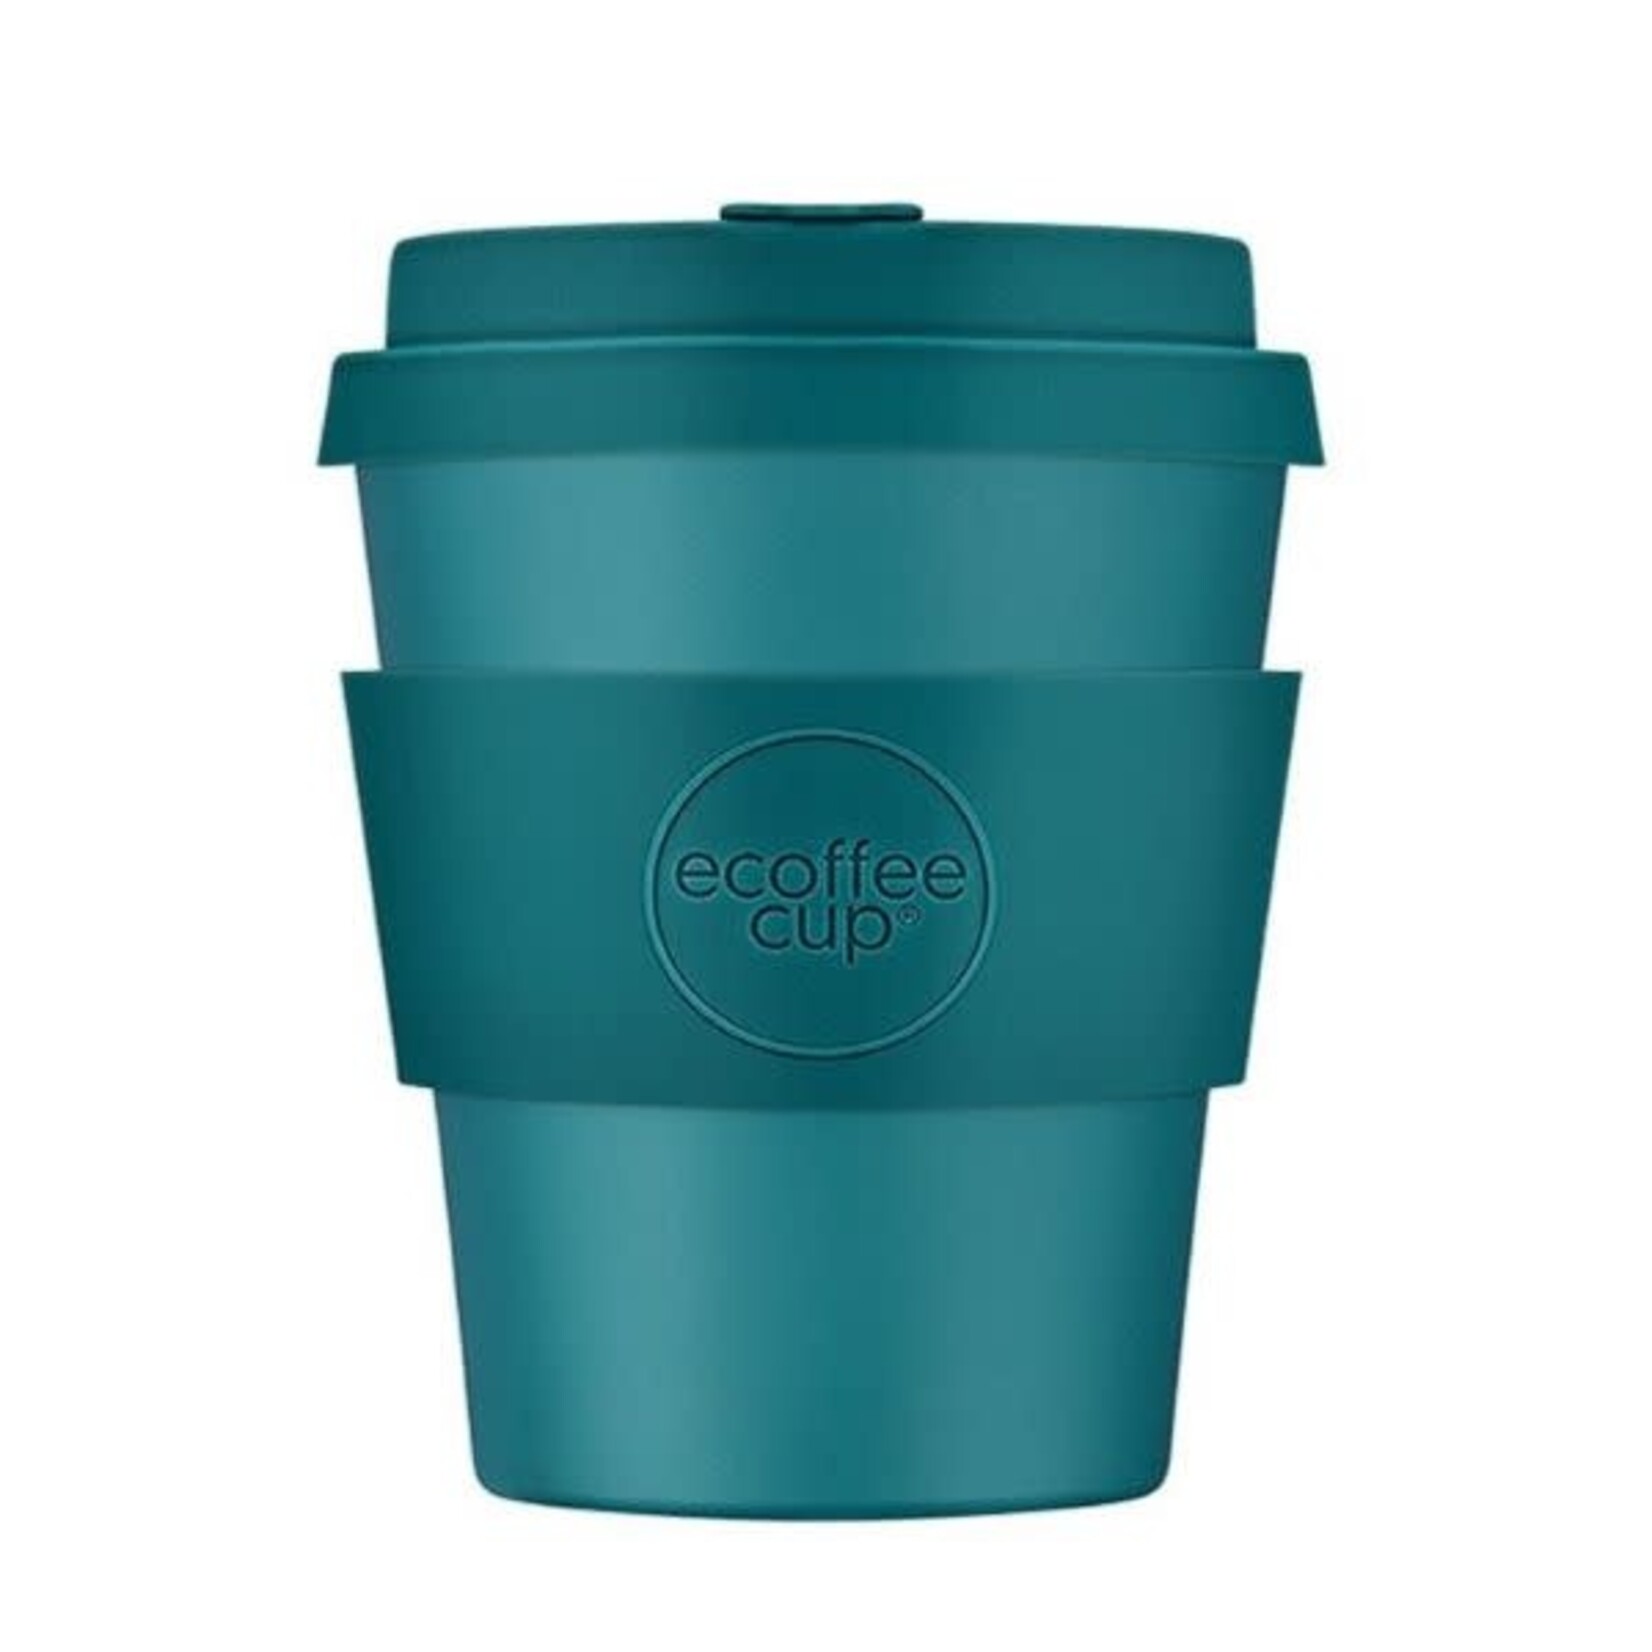 Ecoffee Cup Bay of Fires, 240ml/ 8oz